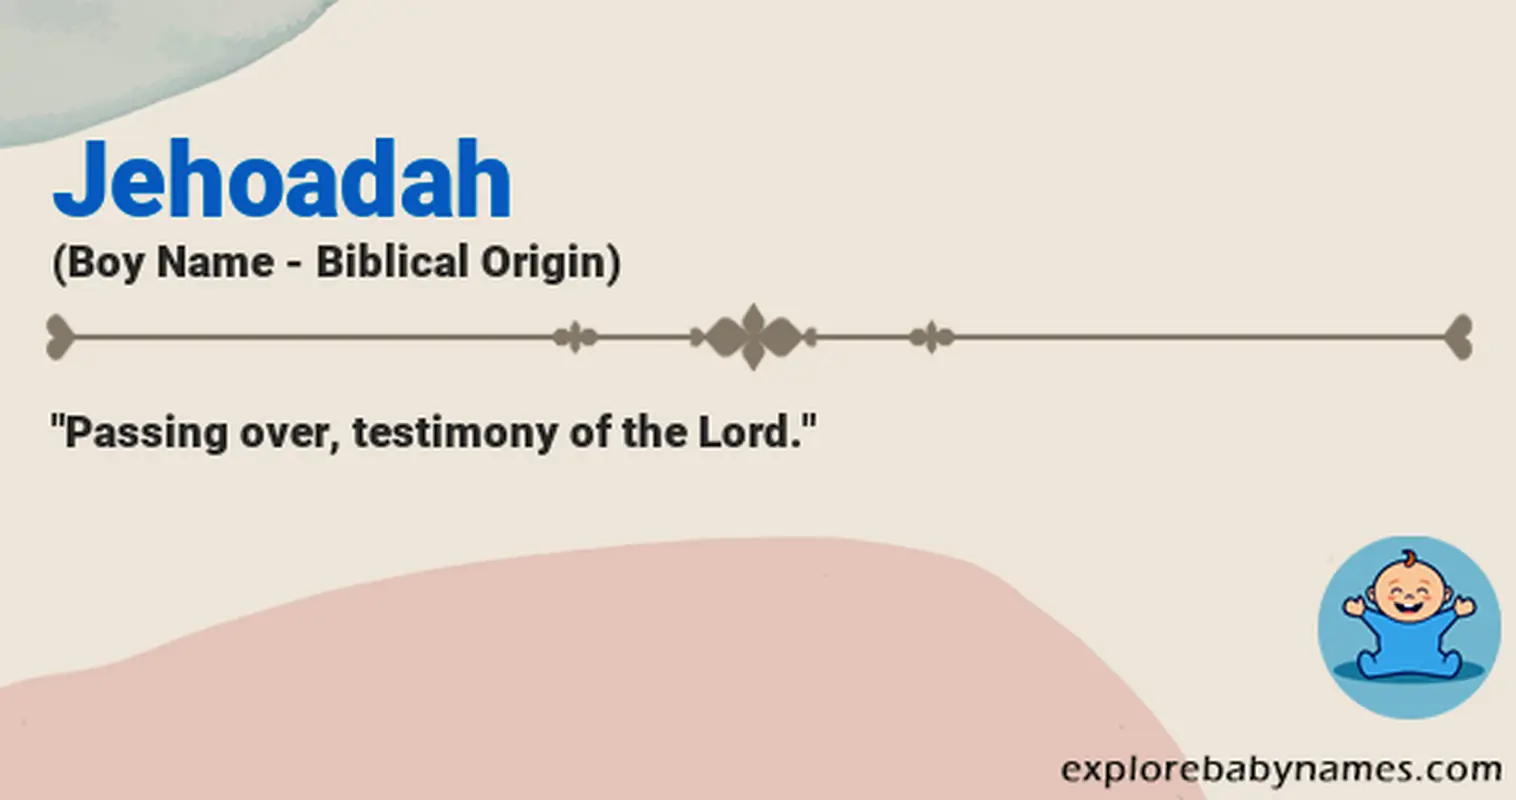 Meaning of Jehoadah